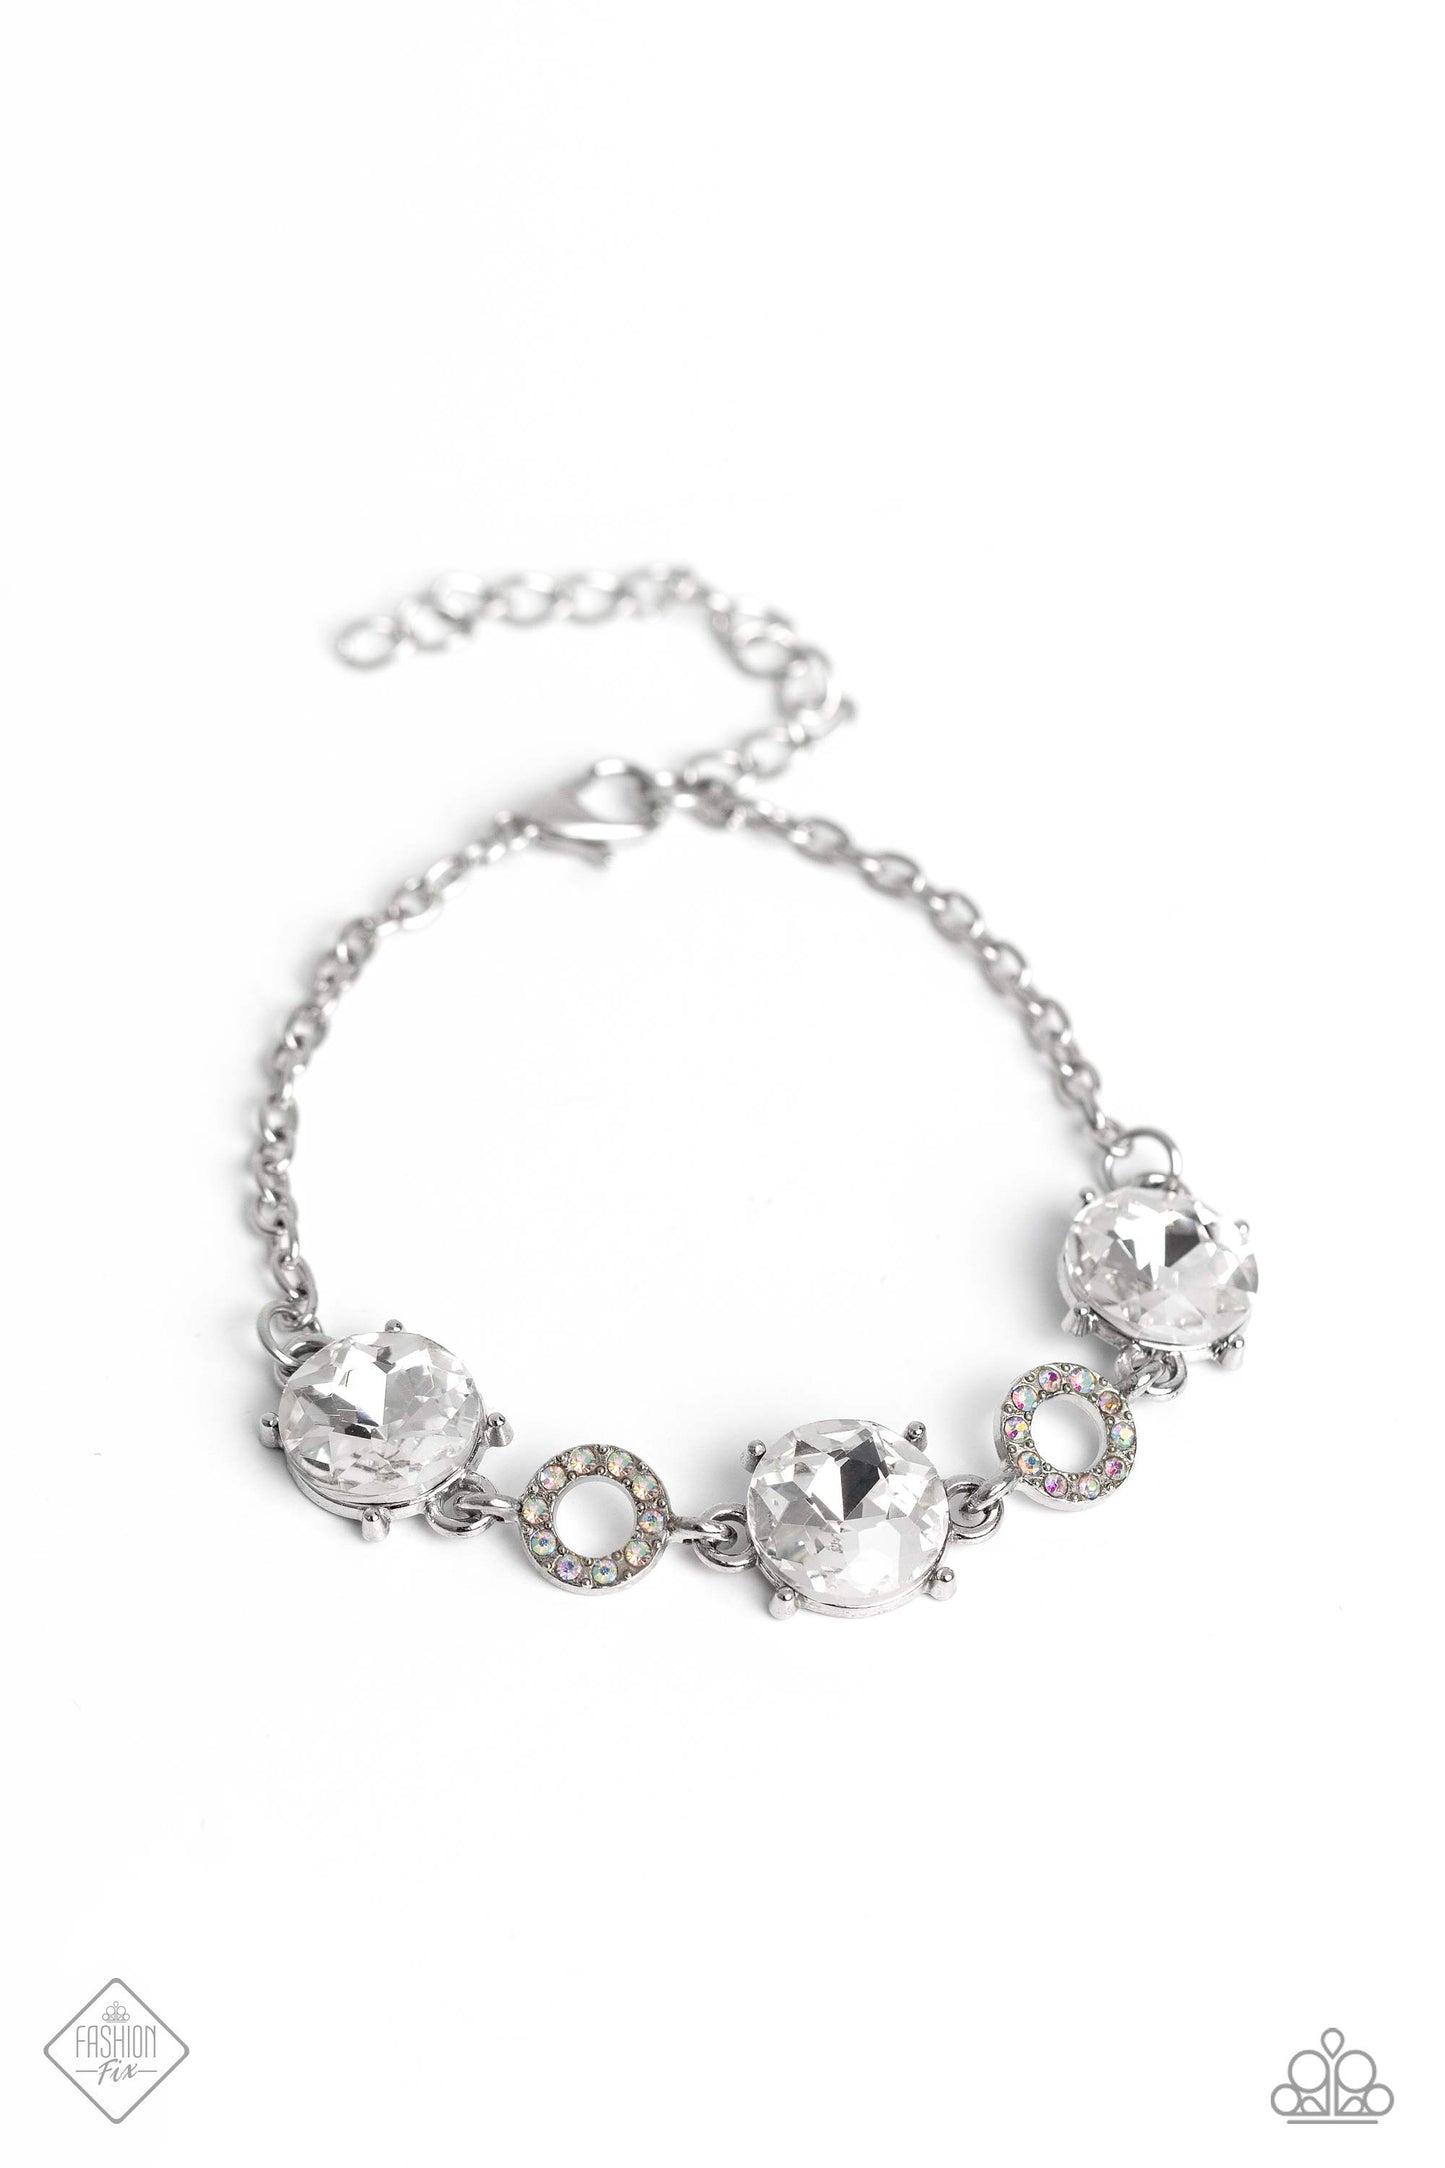 Once Upon A Treasure - White and Silver Bracelet - Paparazzi Accessories - A collection of dramatically pronged and highly reflective white gems alternate with silver rings embossed in iridescent rhinestones, emphasizing the sheen from each element as they link around the wrist. Due to its prismatic palette, color may vary. Sold as one individual bracelet.